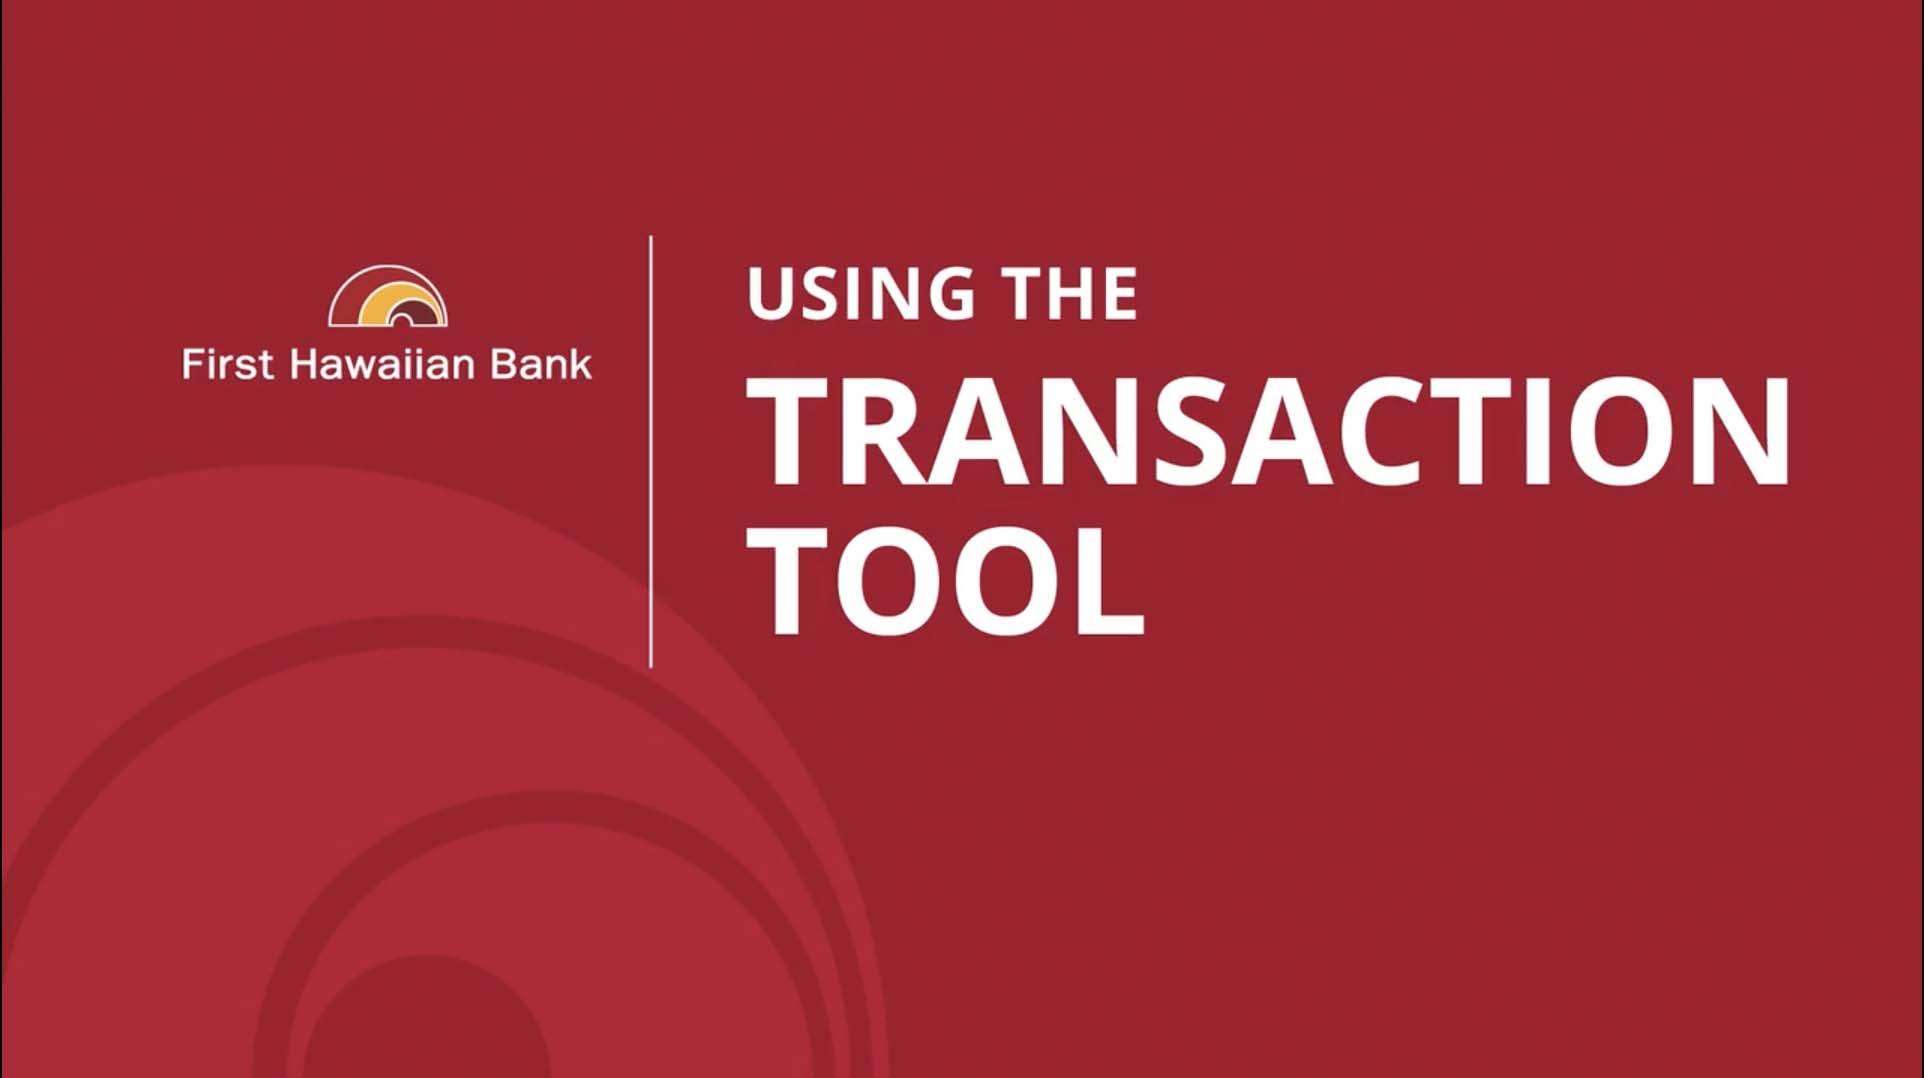 Using the Transaction Tool